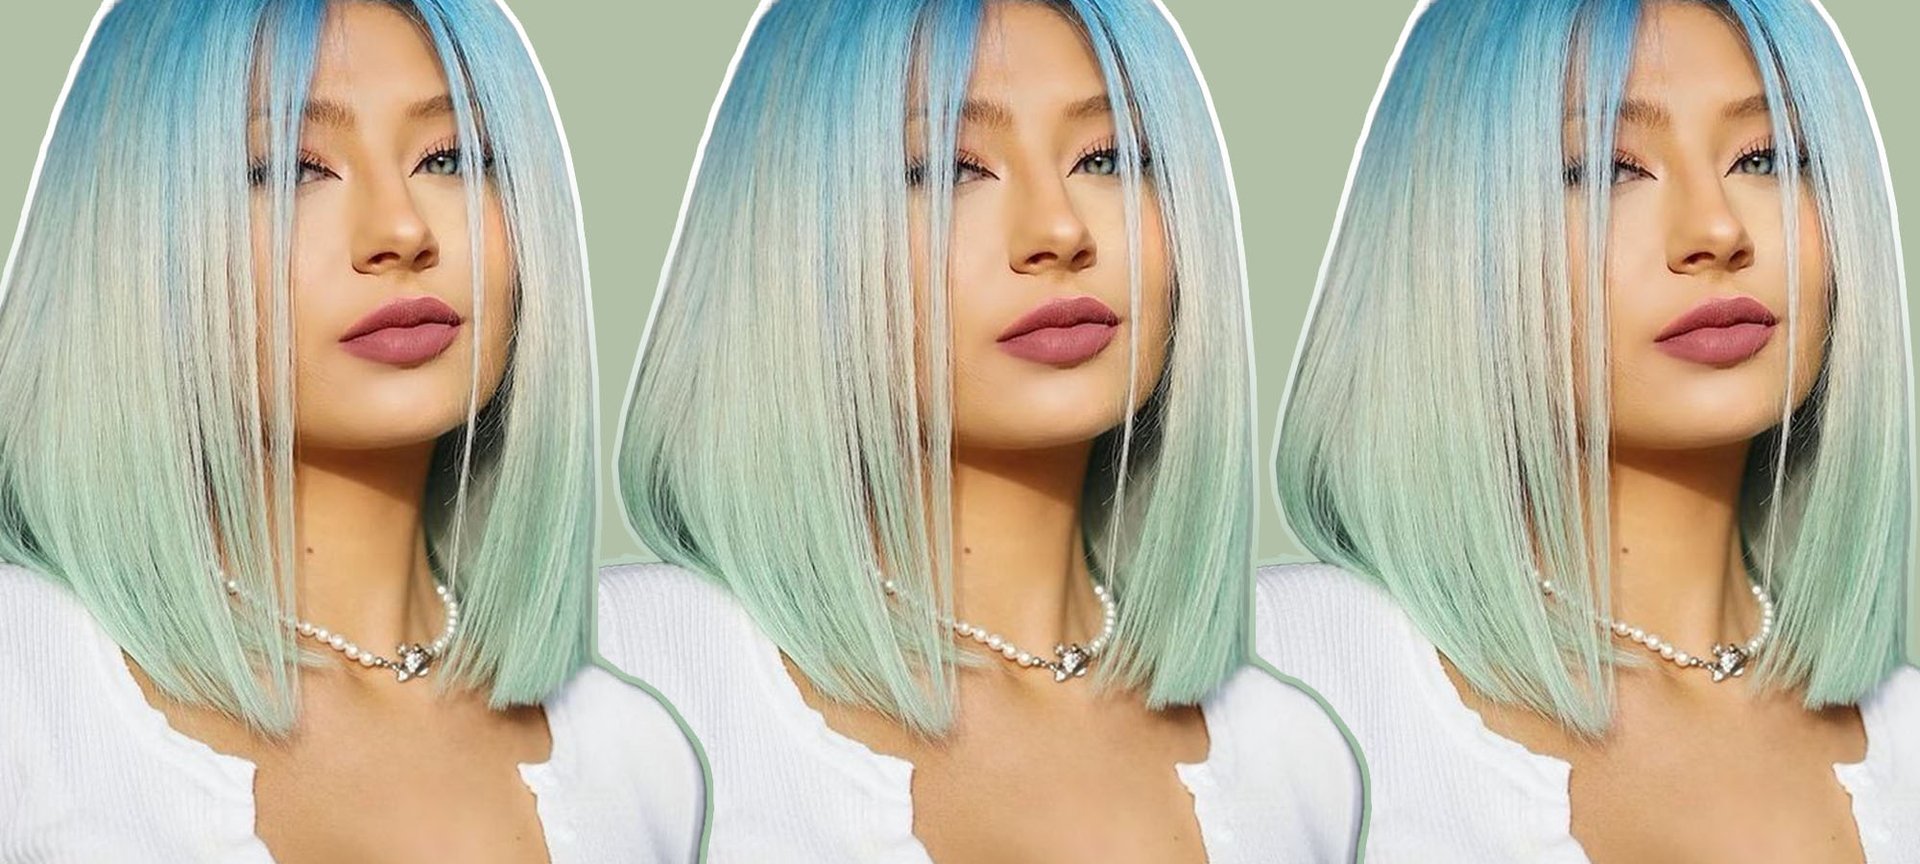 The 17 Biggest 2022 Hair Trends For You To Try - L'Oréal Paris